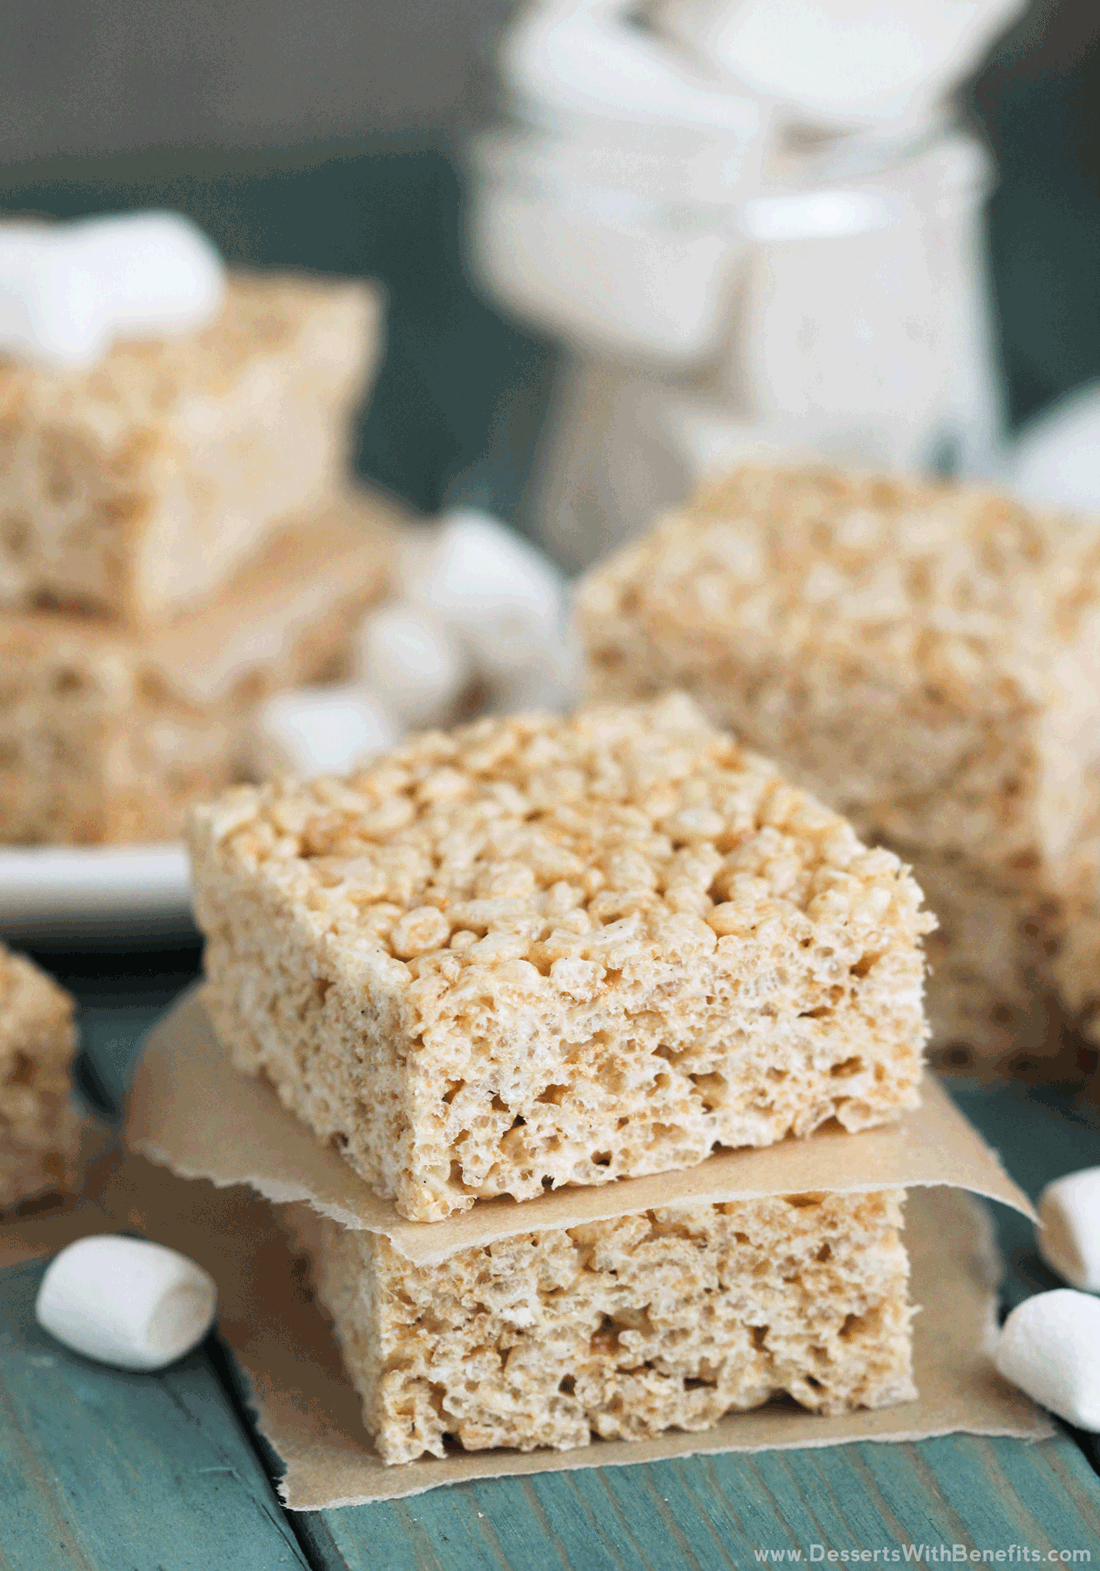 Super simple, quick, and easy 3-ingredient Healthy Krispy Treats recipe (plus Chocolate-Dipped Heart-Shaped Krispy Treats perfect for Valentine’s Day) – these homemade treats are sweet, chewy and crunchy, you’d never know they’re all natural, low fat, refined sugar free, and gluten free! Healthy Dessert Recipes at Desserts with Benefits